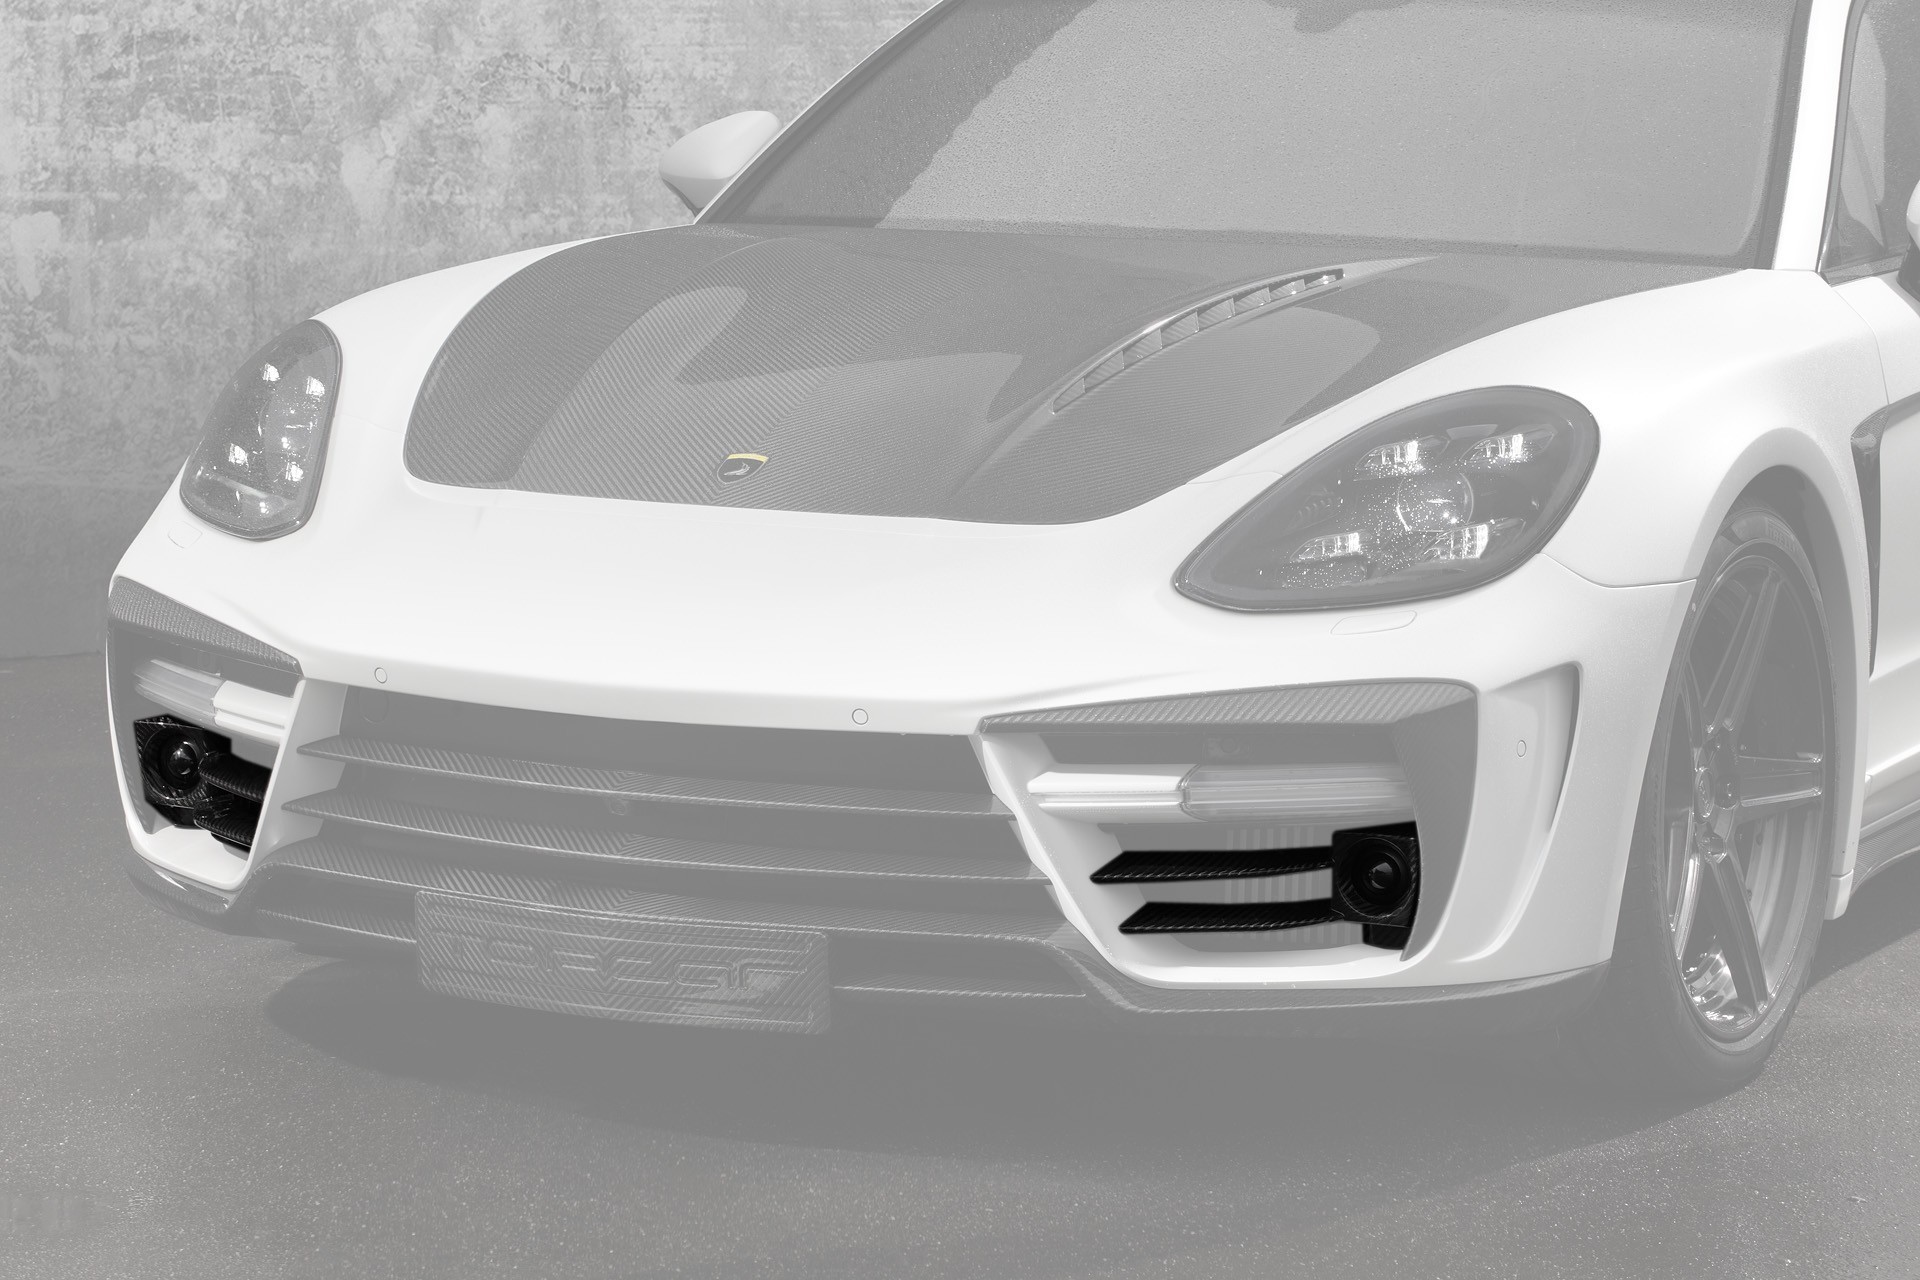 Check our price and buy Topcar Design body kit for Porsche Panamera GTR Edition 971